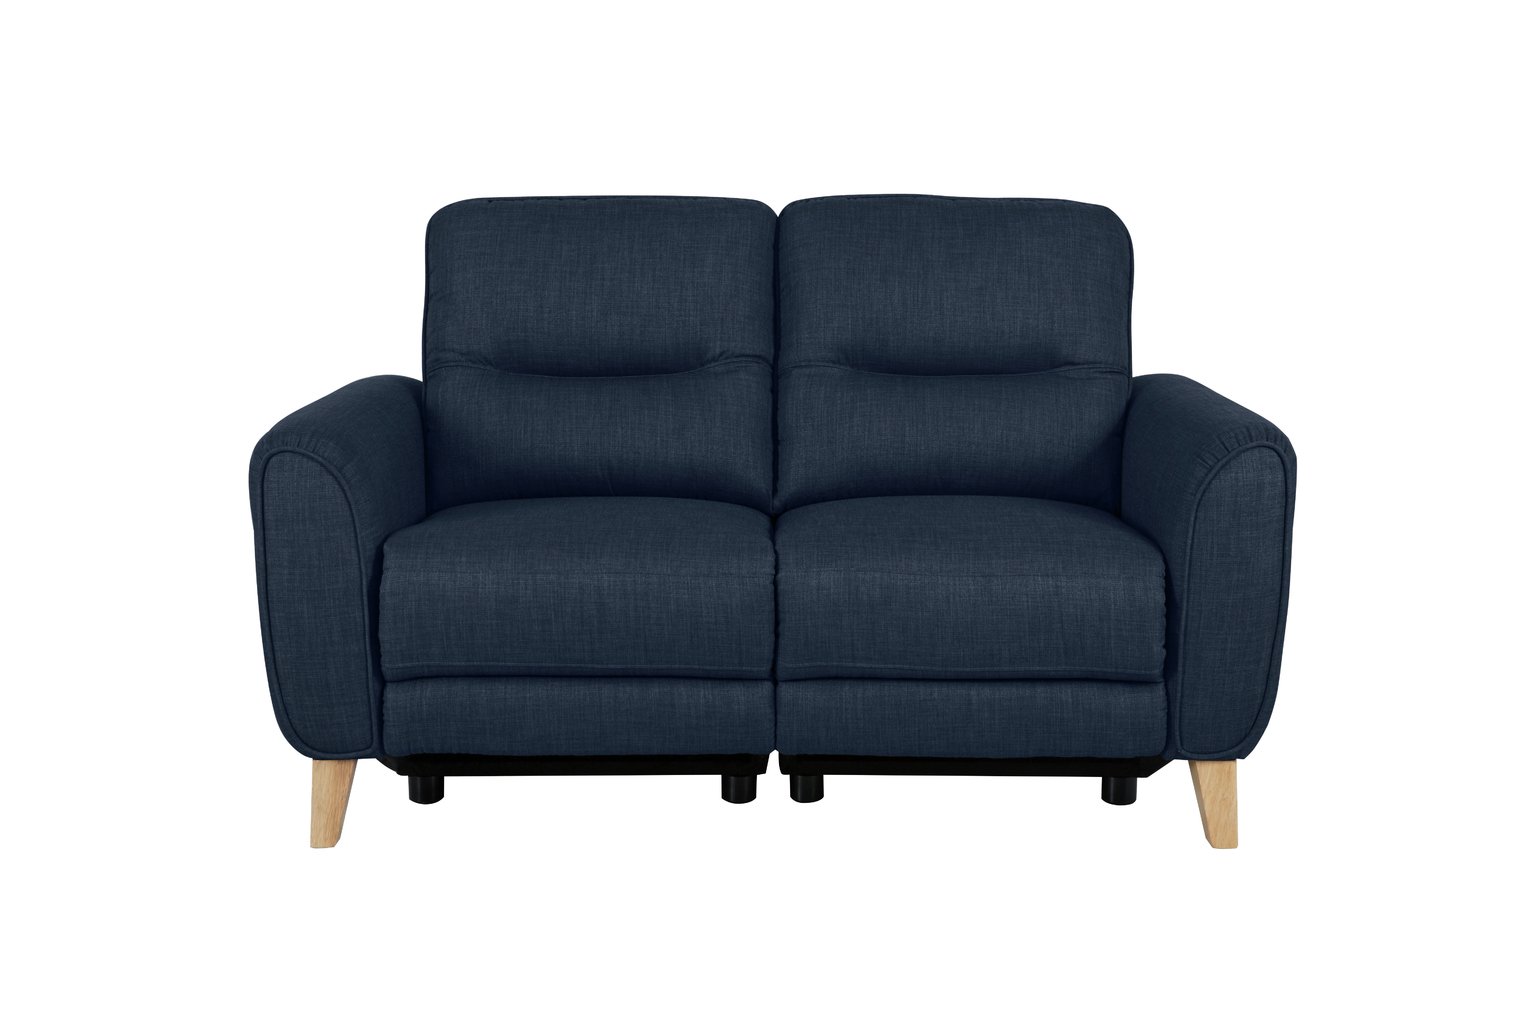 Habitat Tommy 2 Seater Fabric Recliner Sofa Review